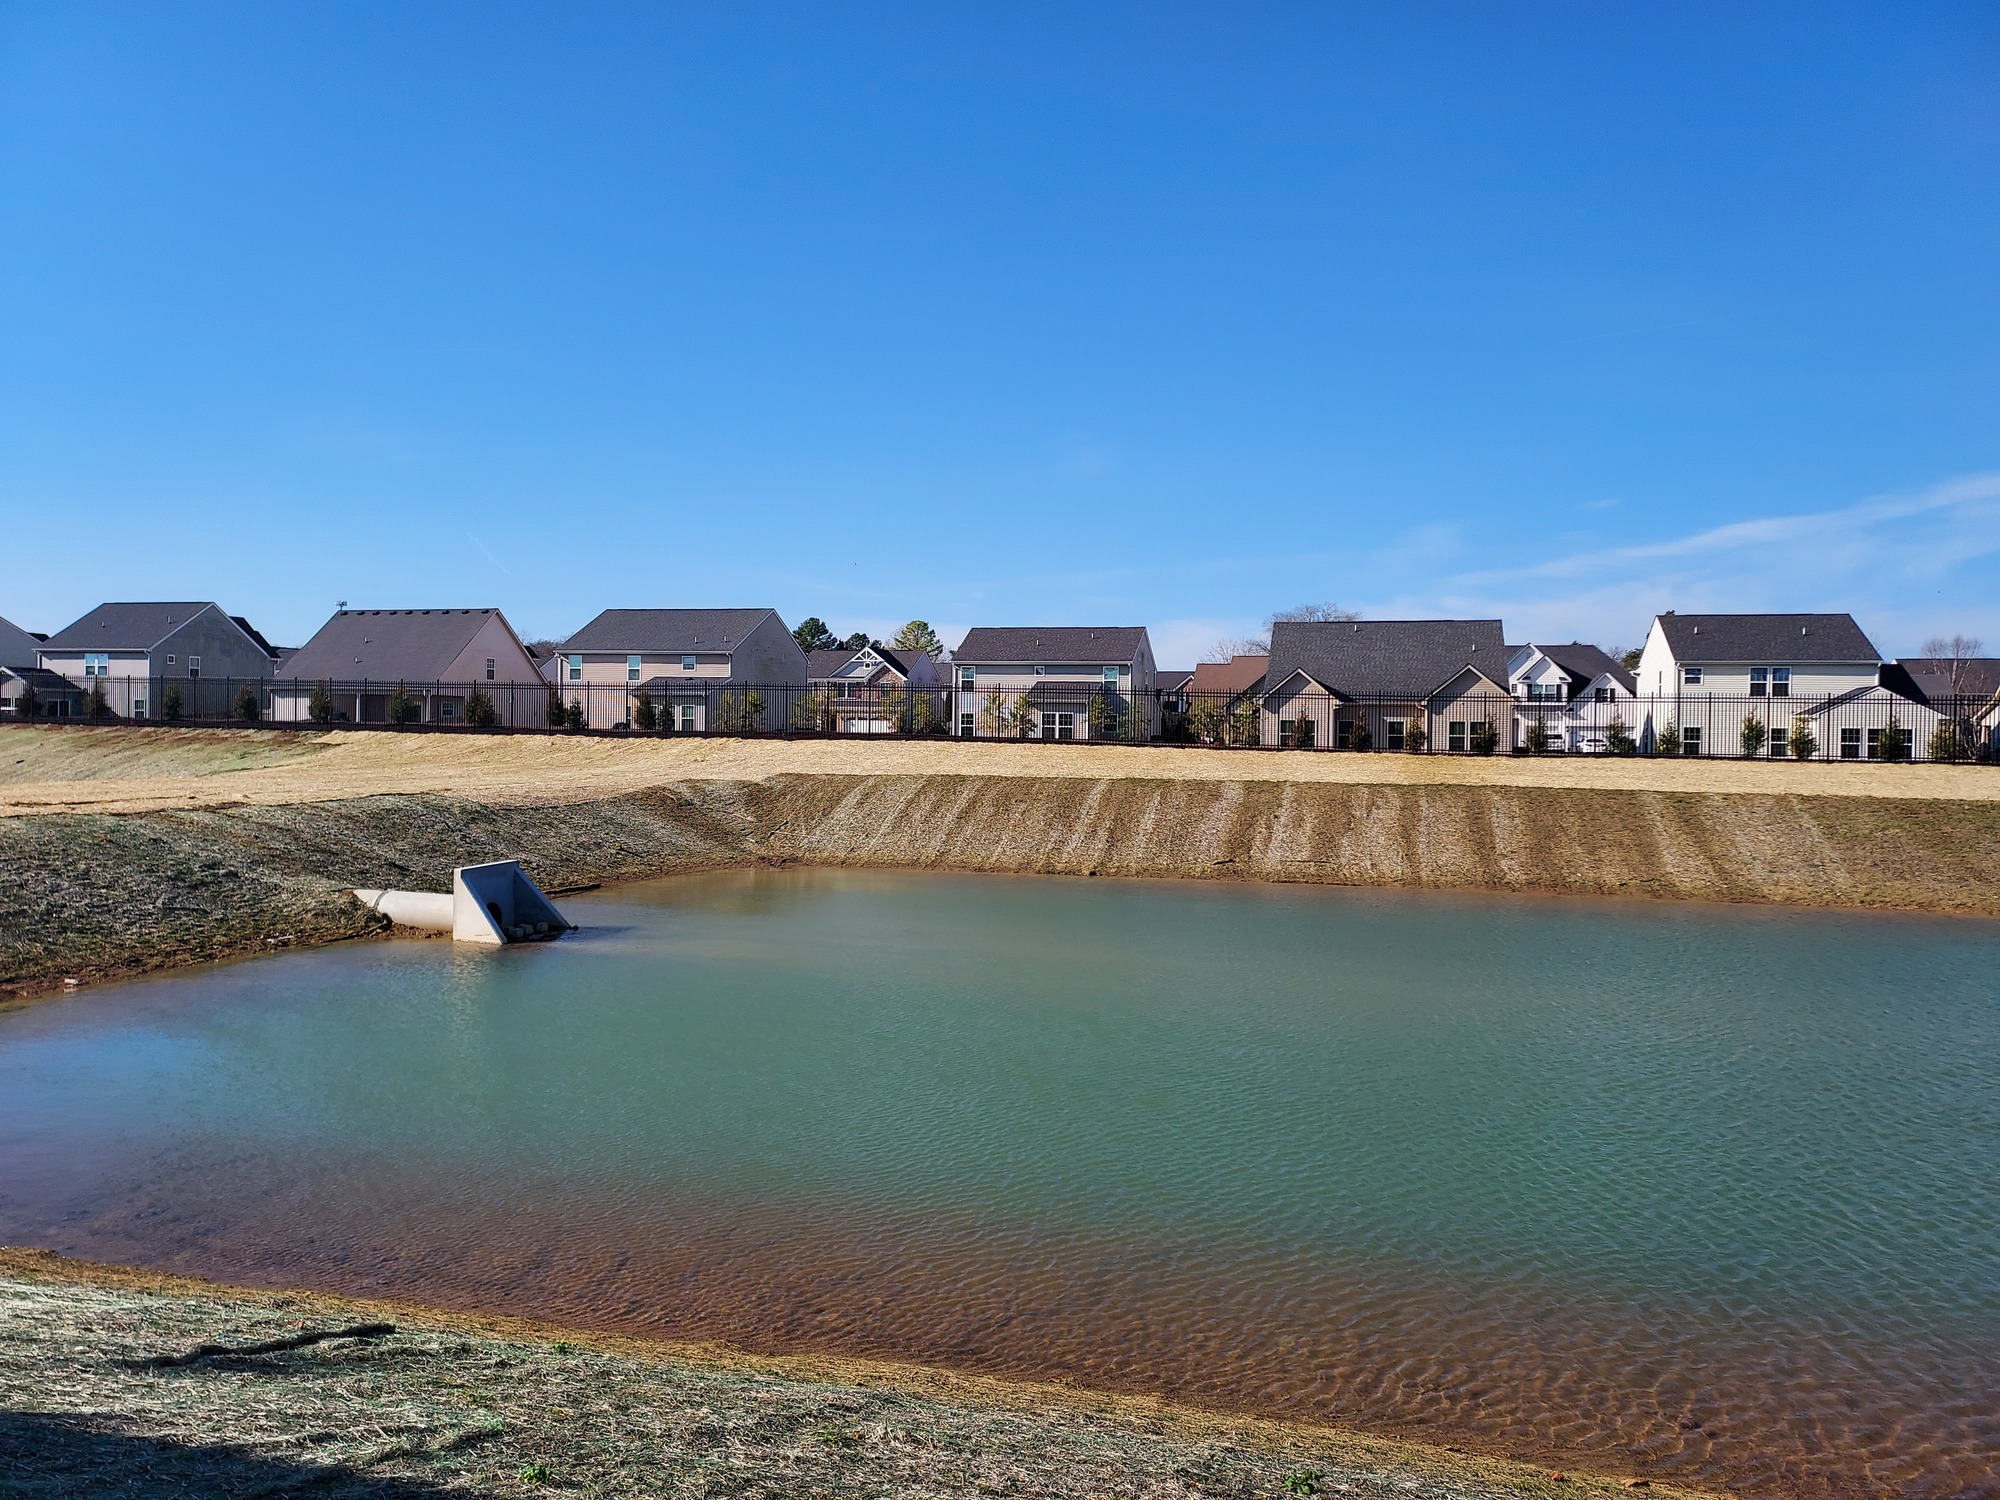 a pond at the project site that is lined with houses